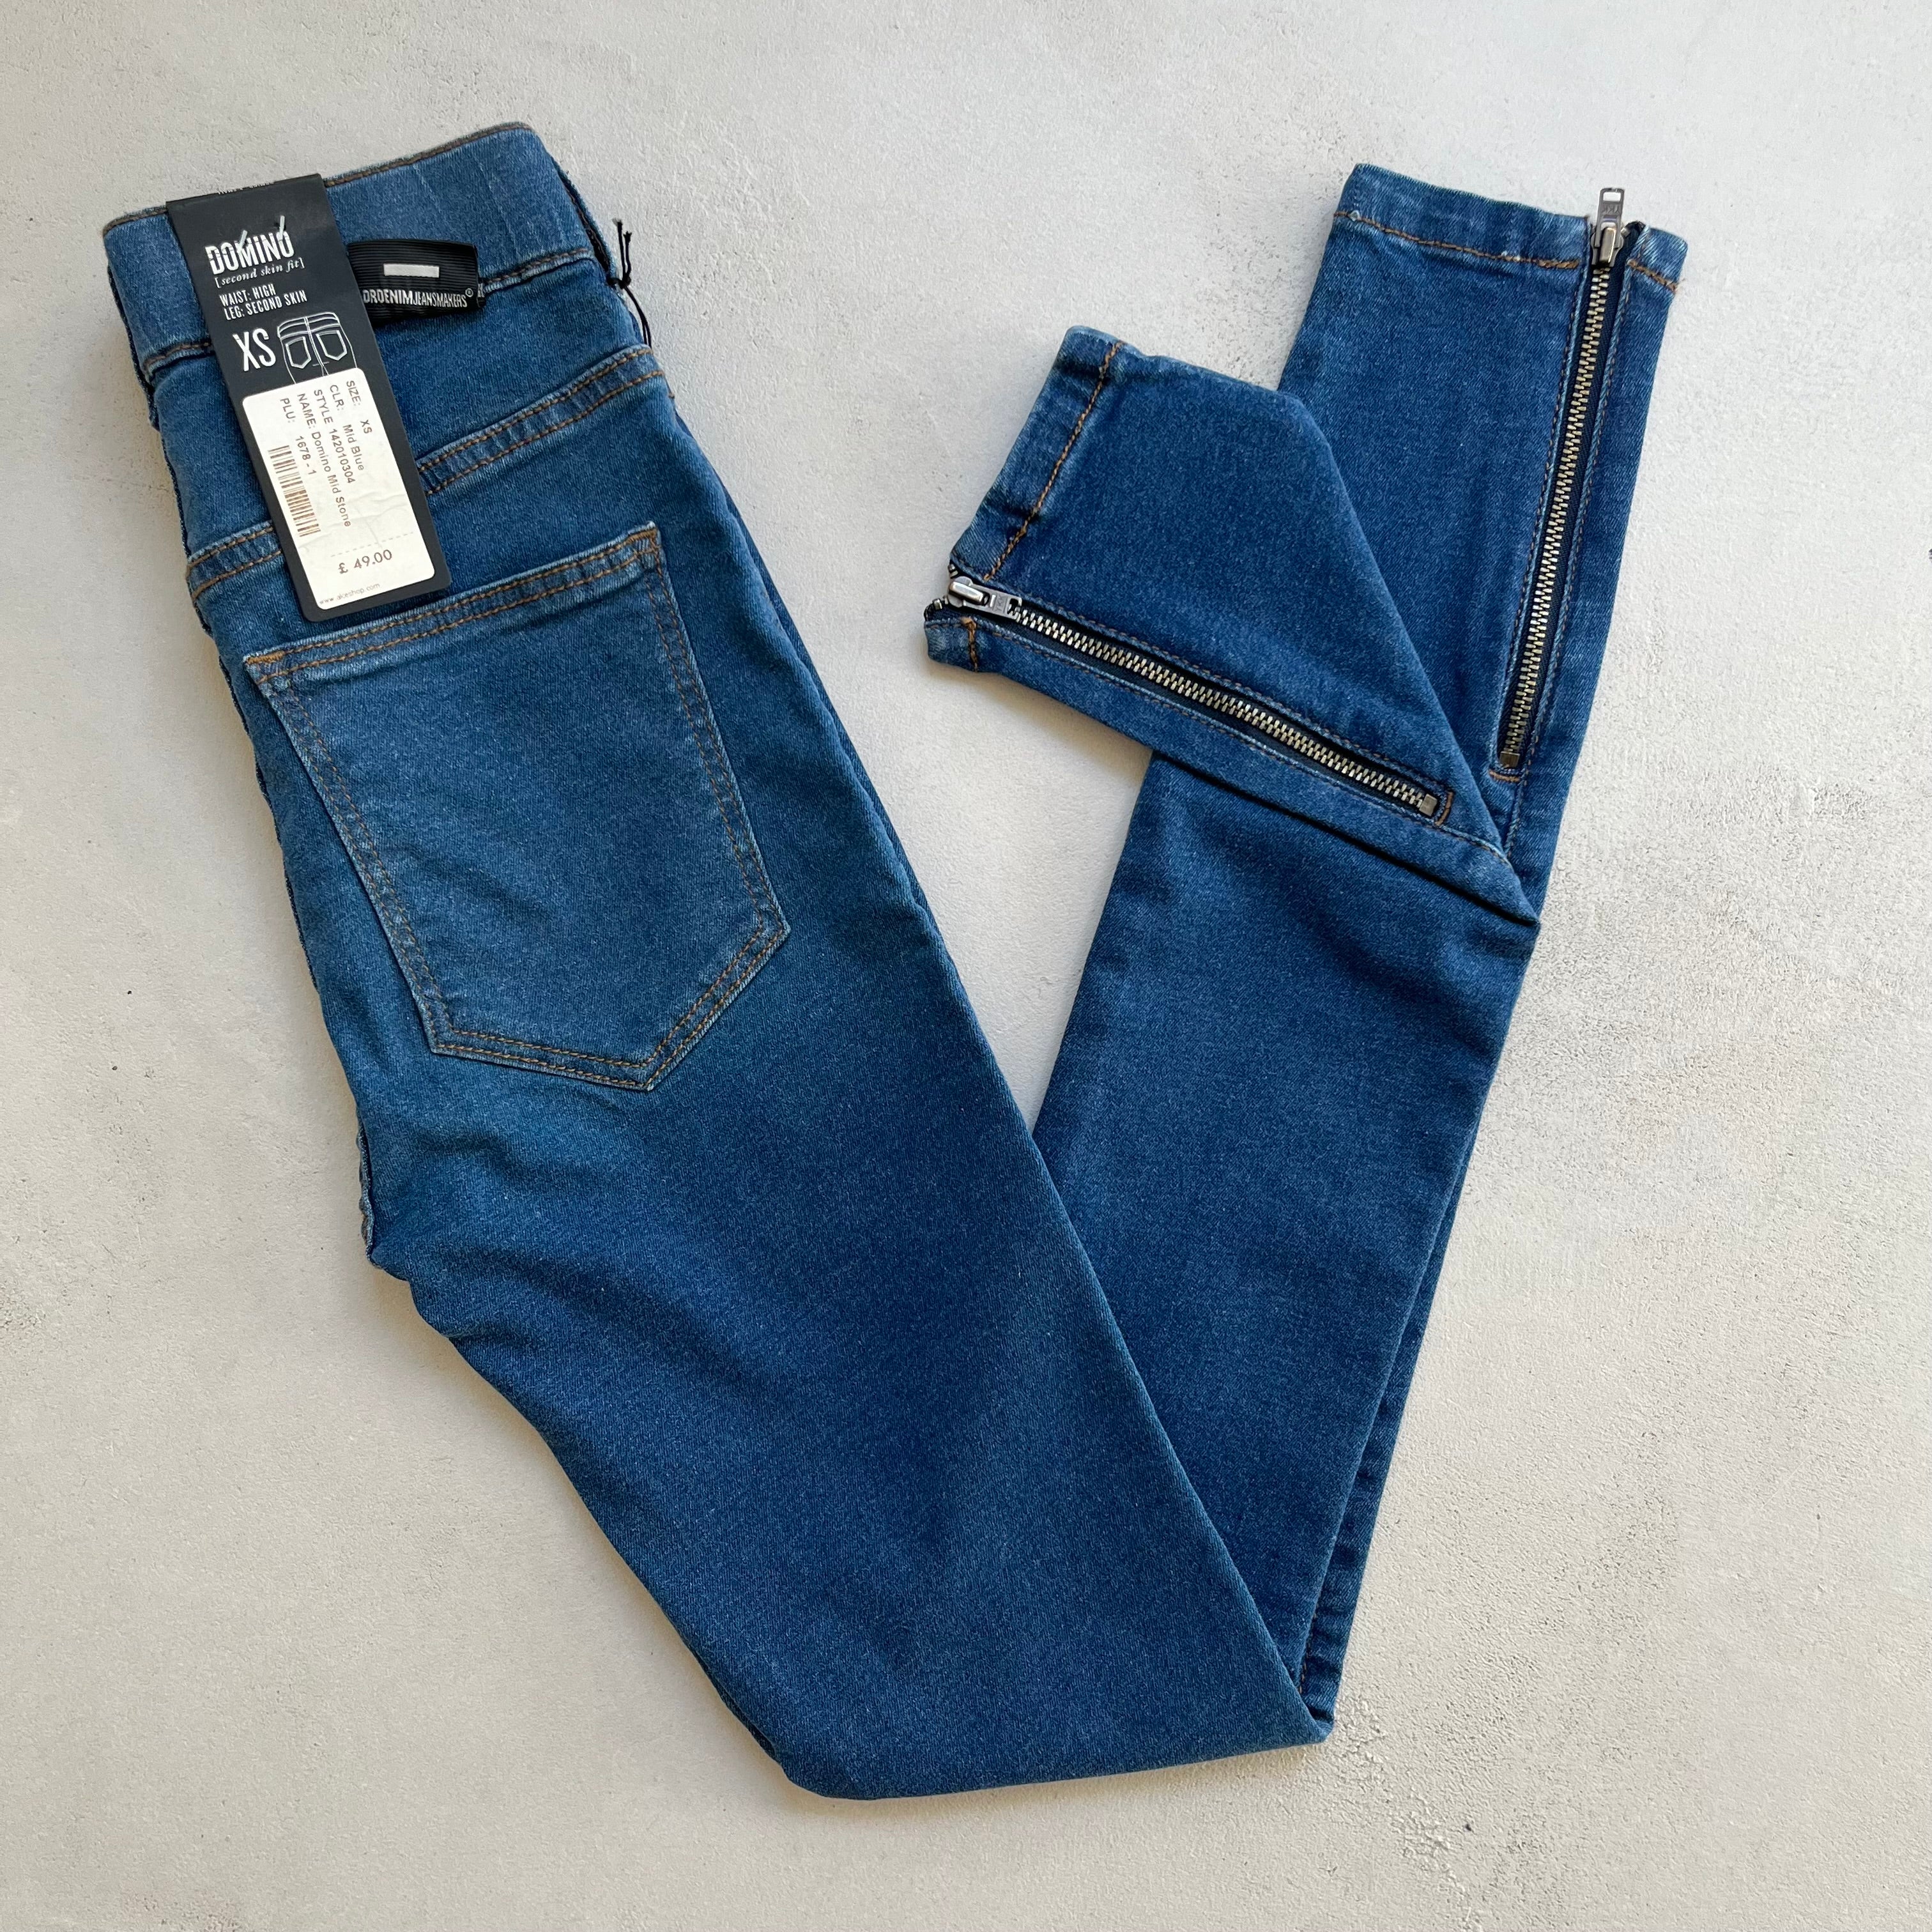 A pair of Dr Denim Domino Ankle Zip - Stone Blue high-rise skinny blue jeans with a zipper on the side, made of denim.